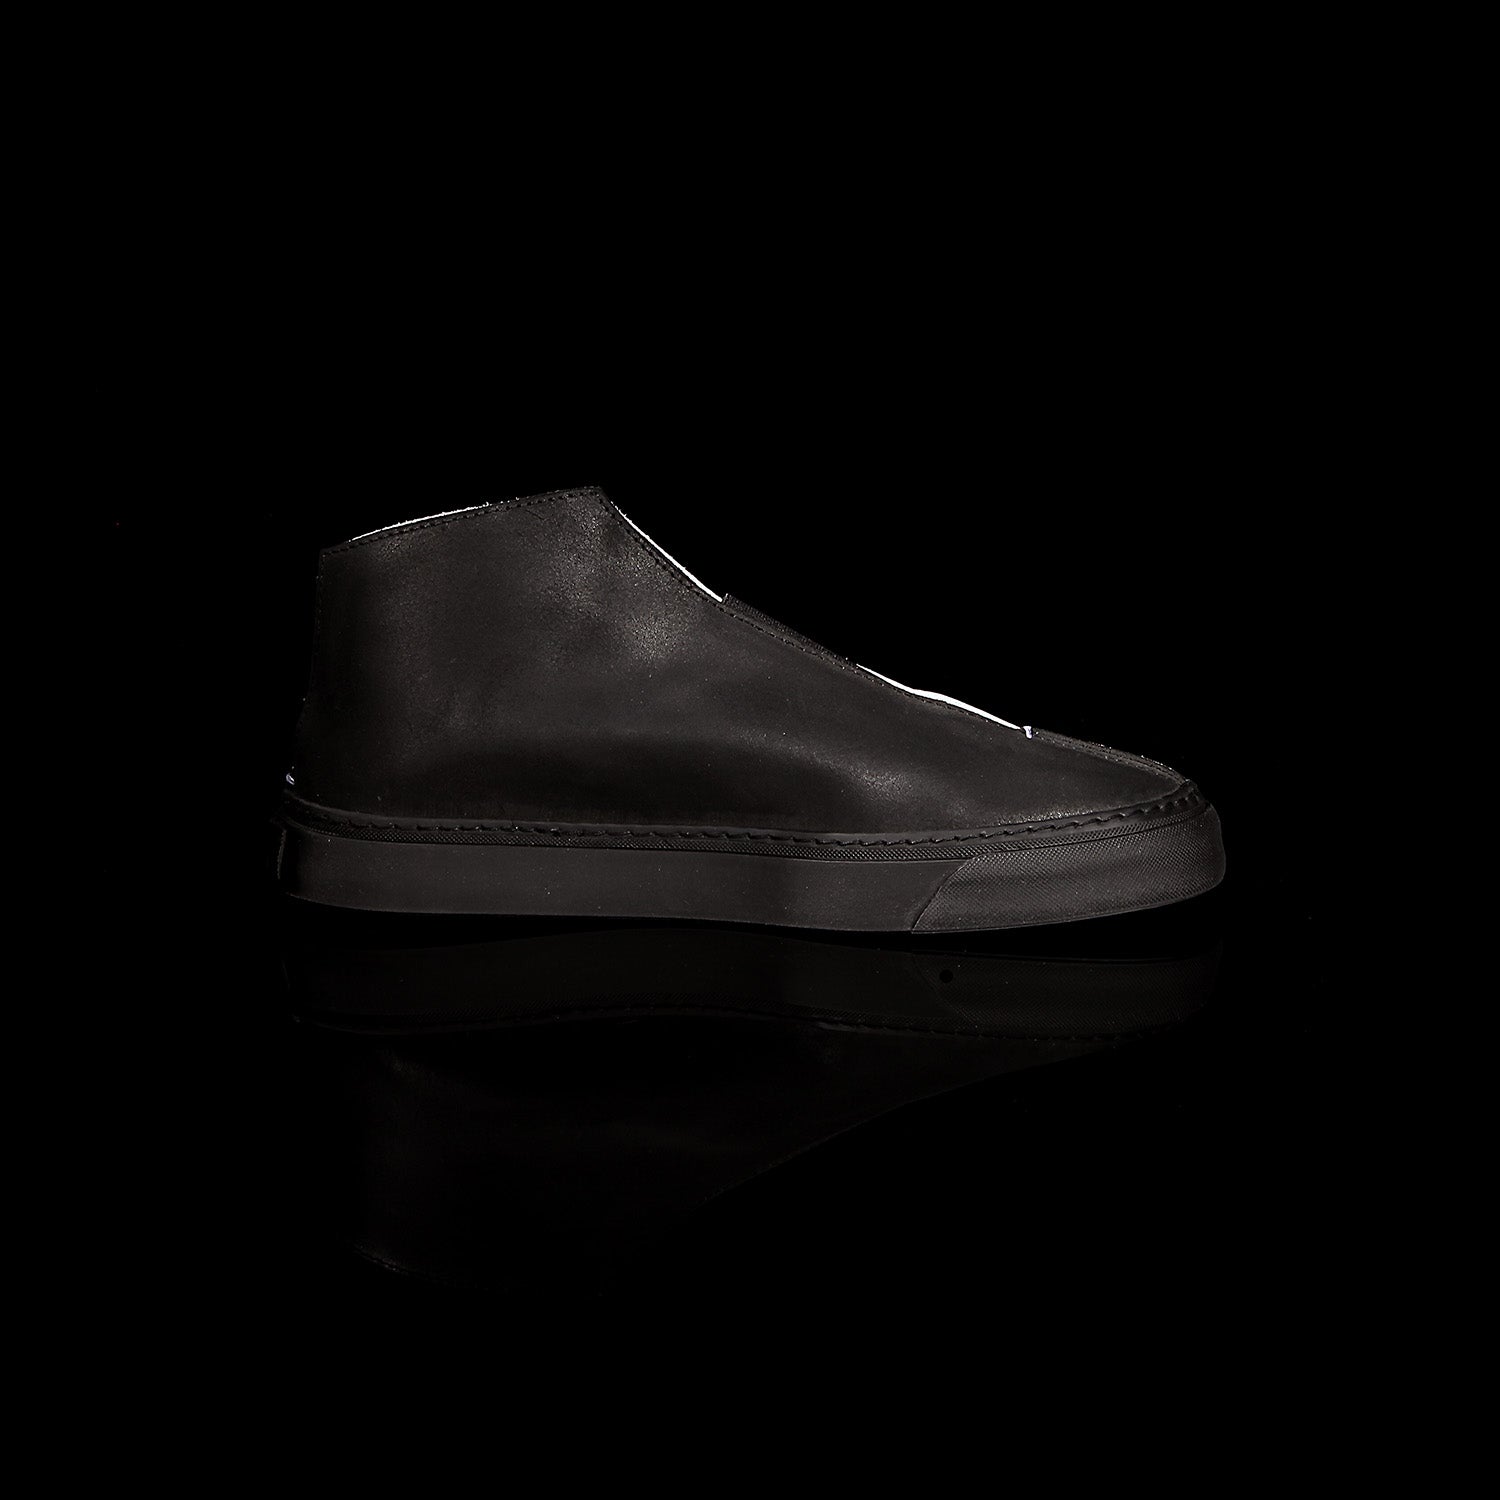 HANDMADE LEATHER SNEAKER - MADE IN ITALY - ARCHITECTURAL SHOES ...